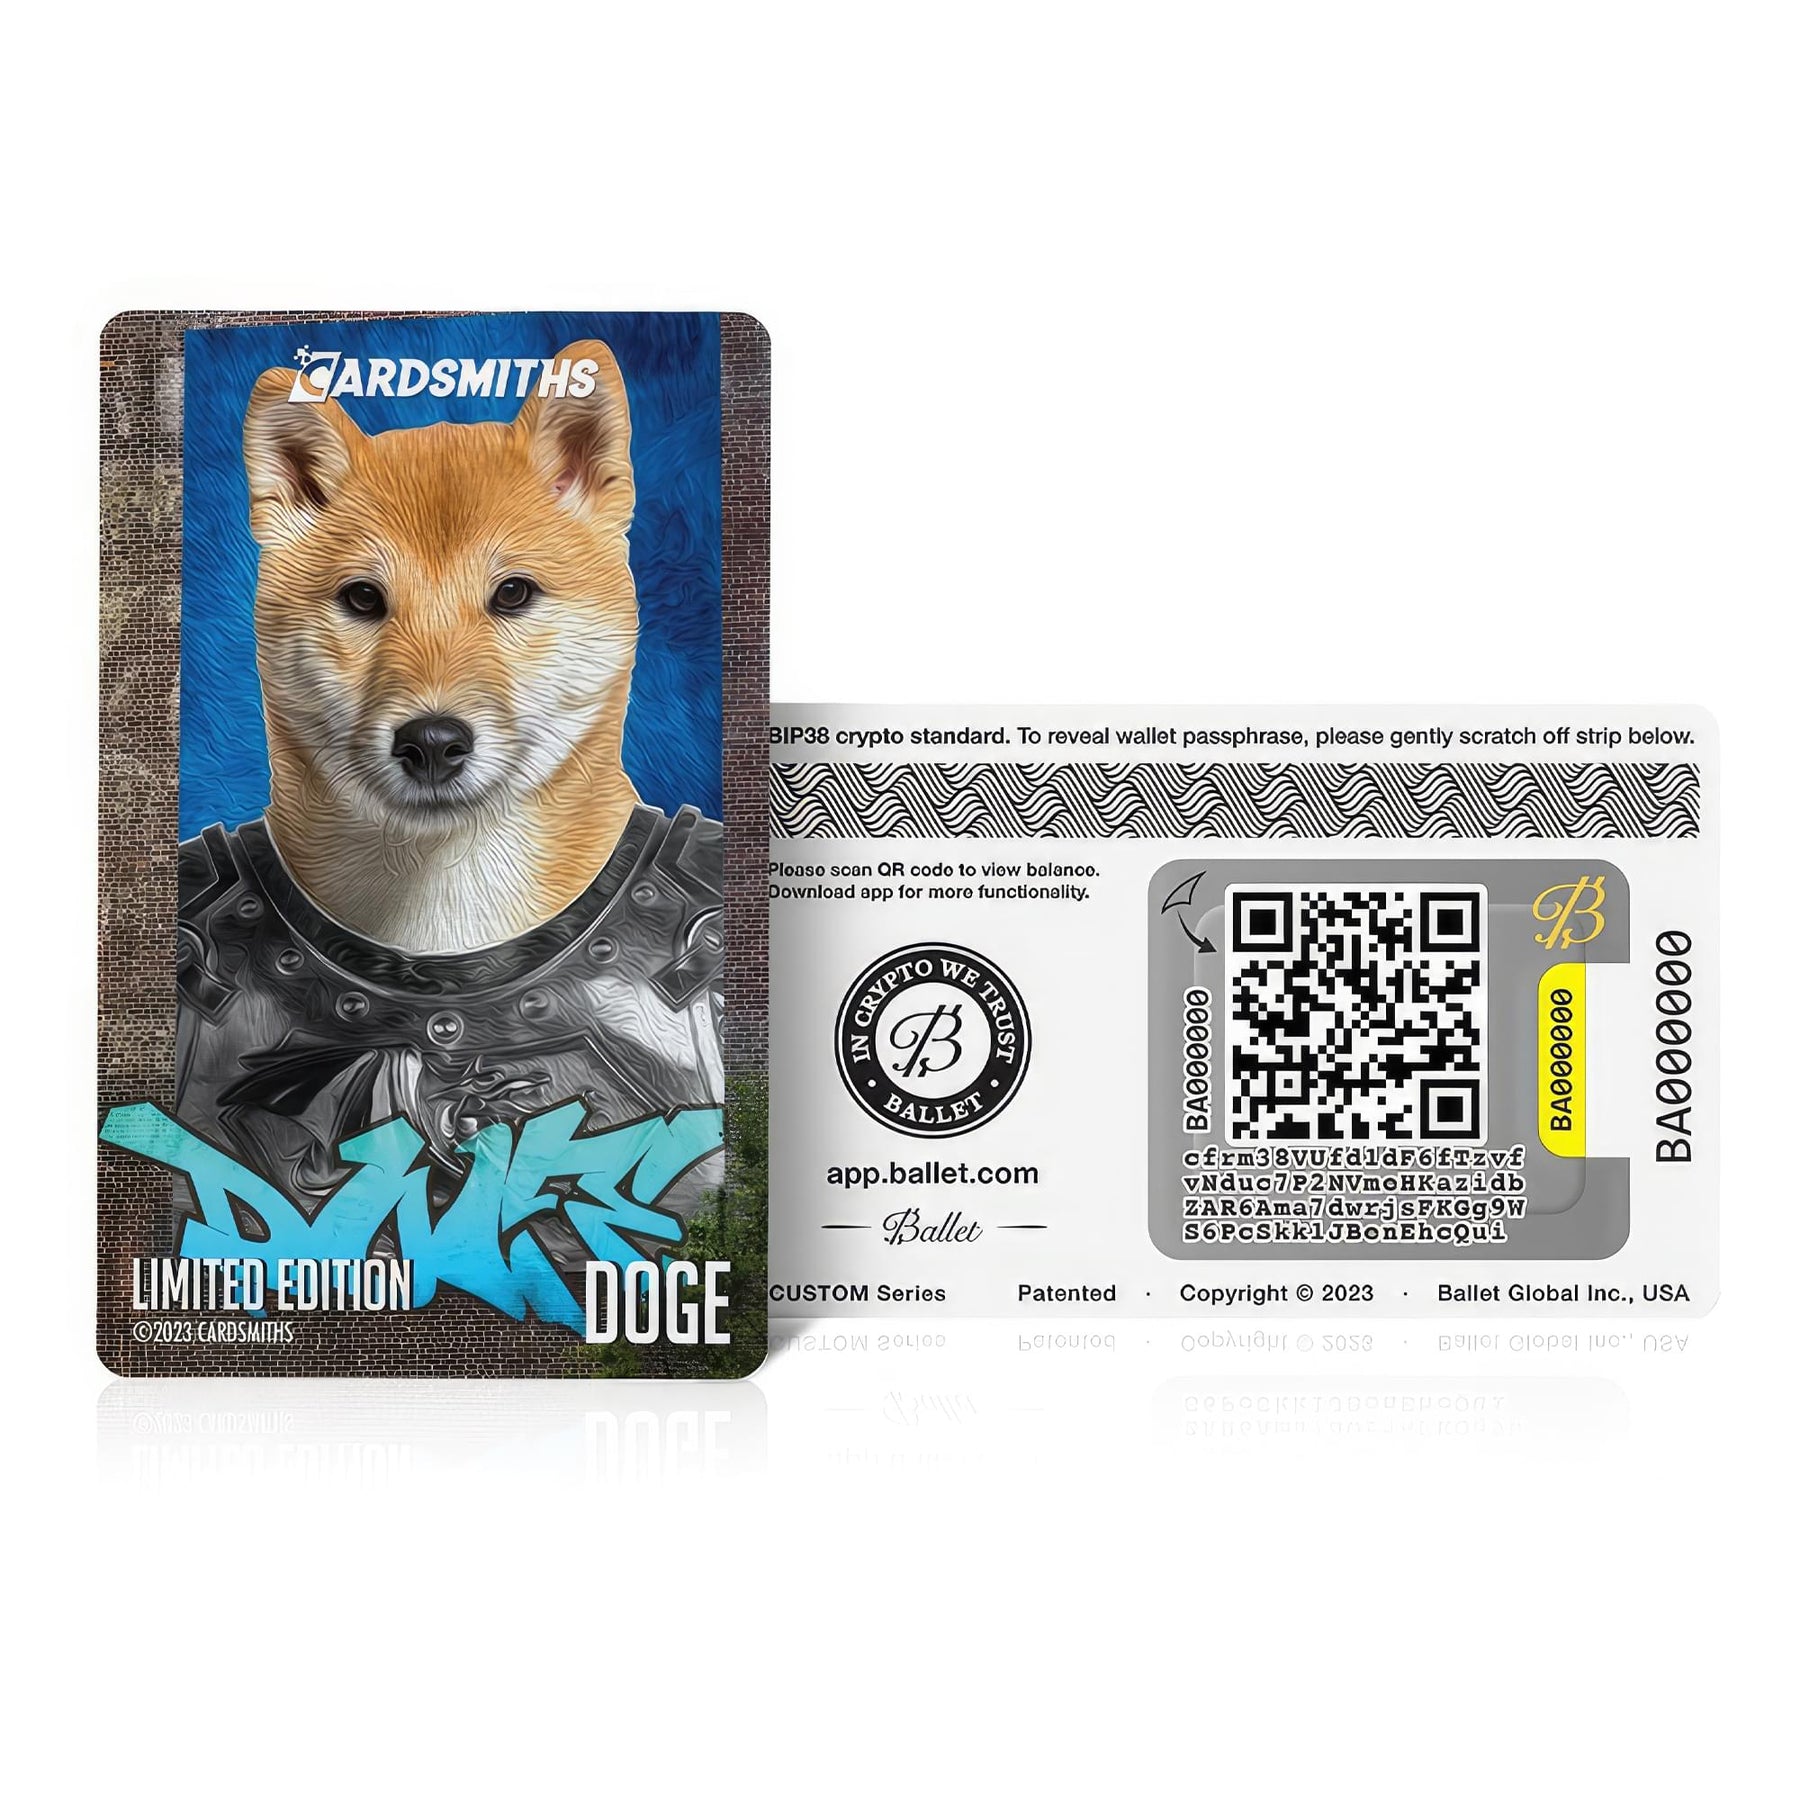 Cardsmiths Dogecoin Ballet Limited Edition Wallet Card